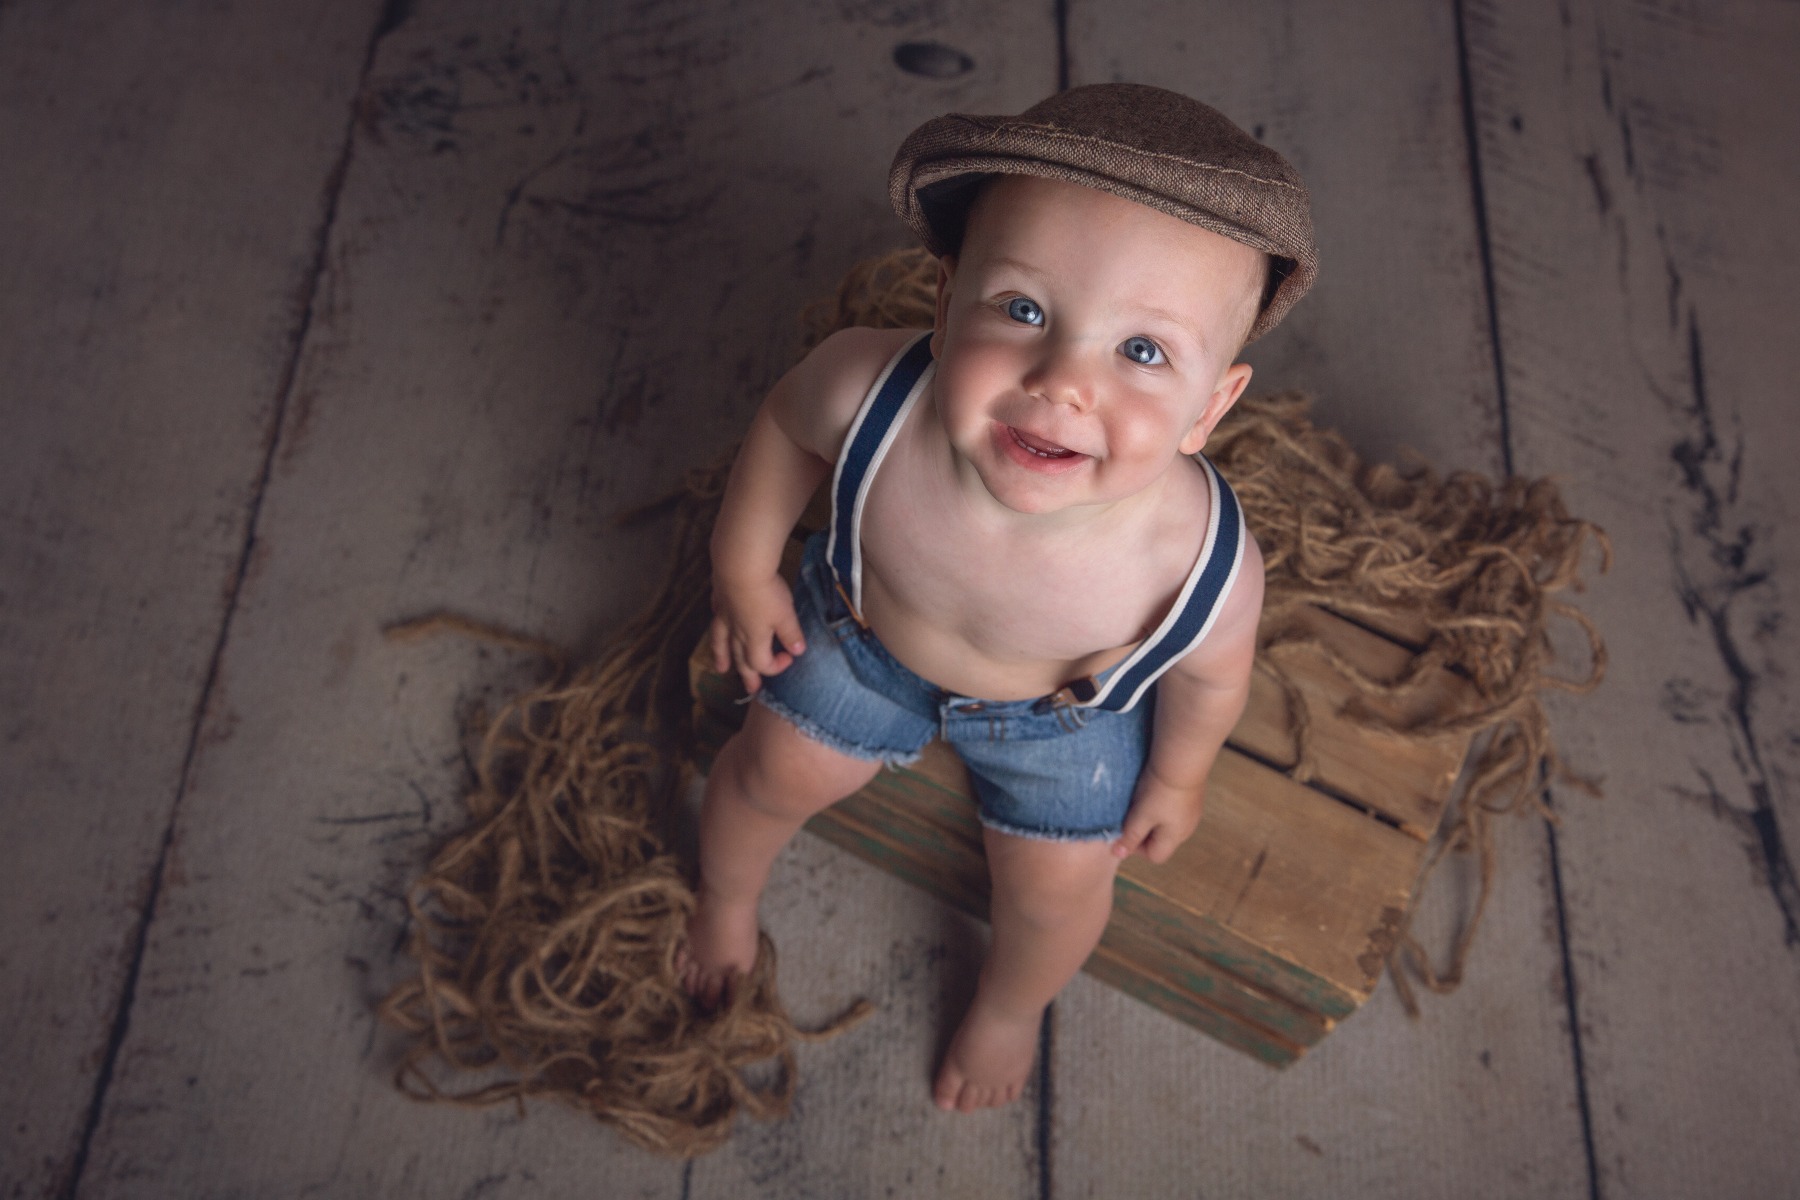 baby in a driver hat and suspenders sits on a wooden crate